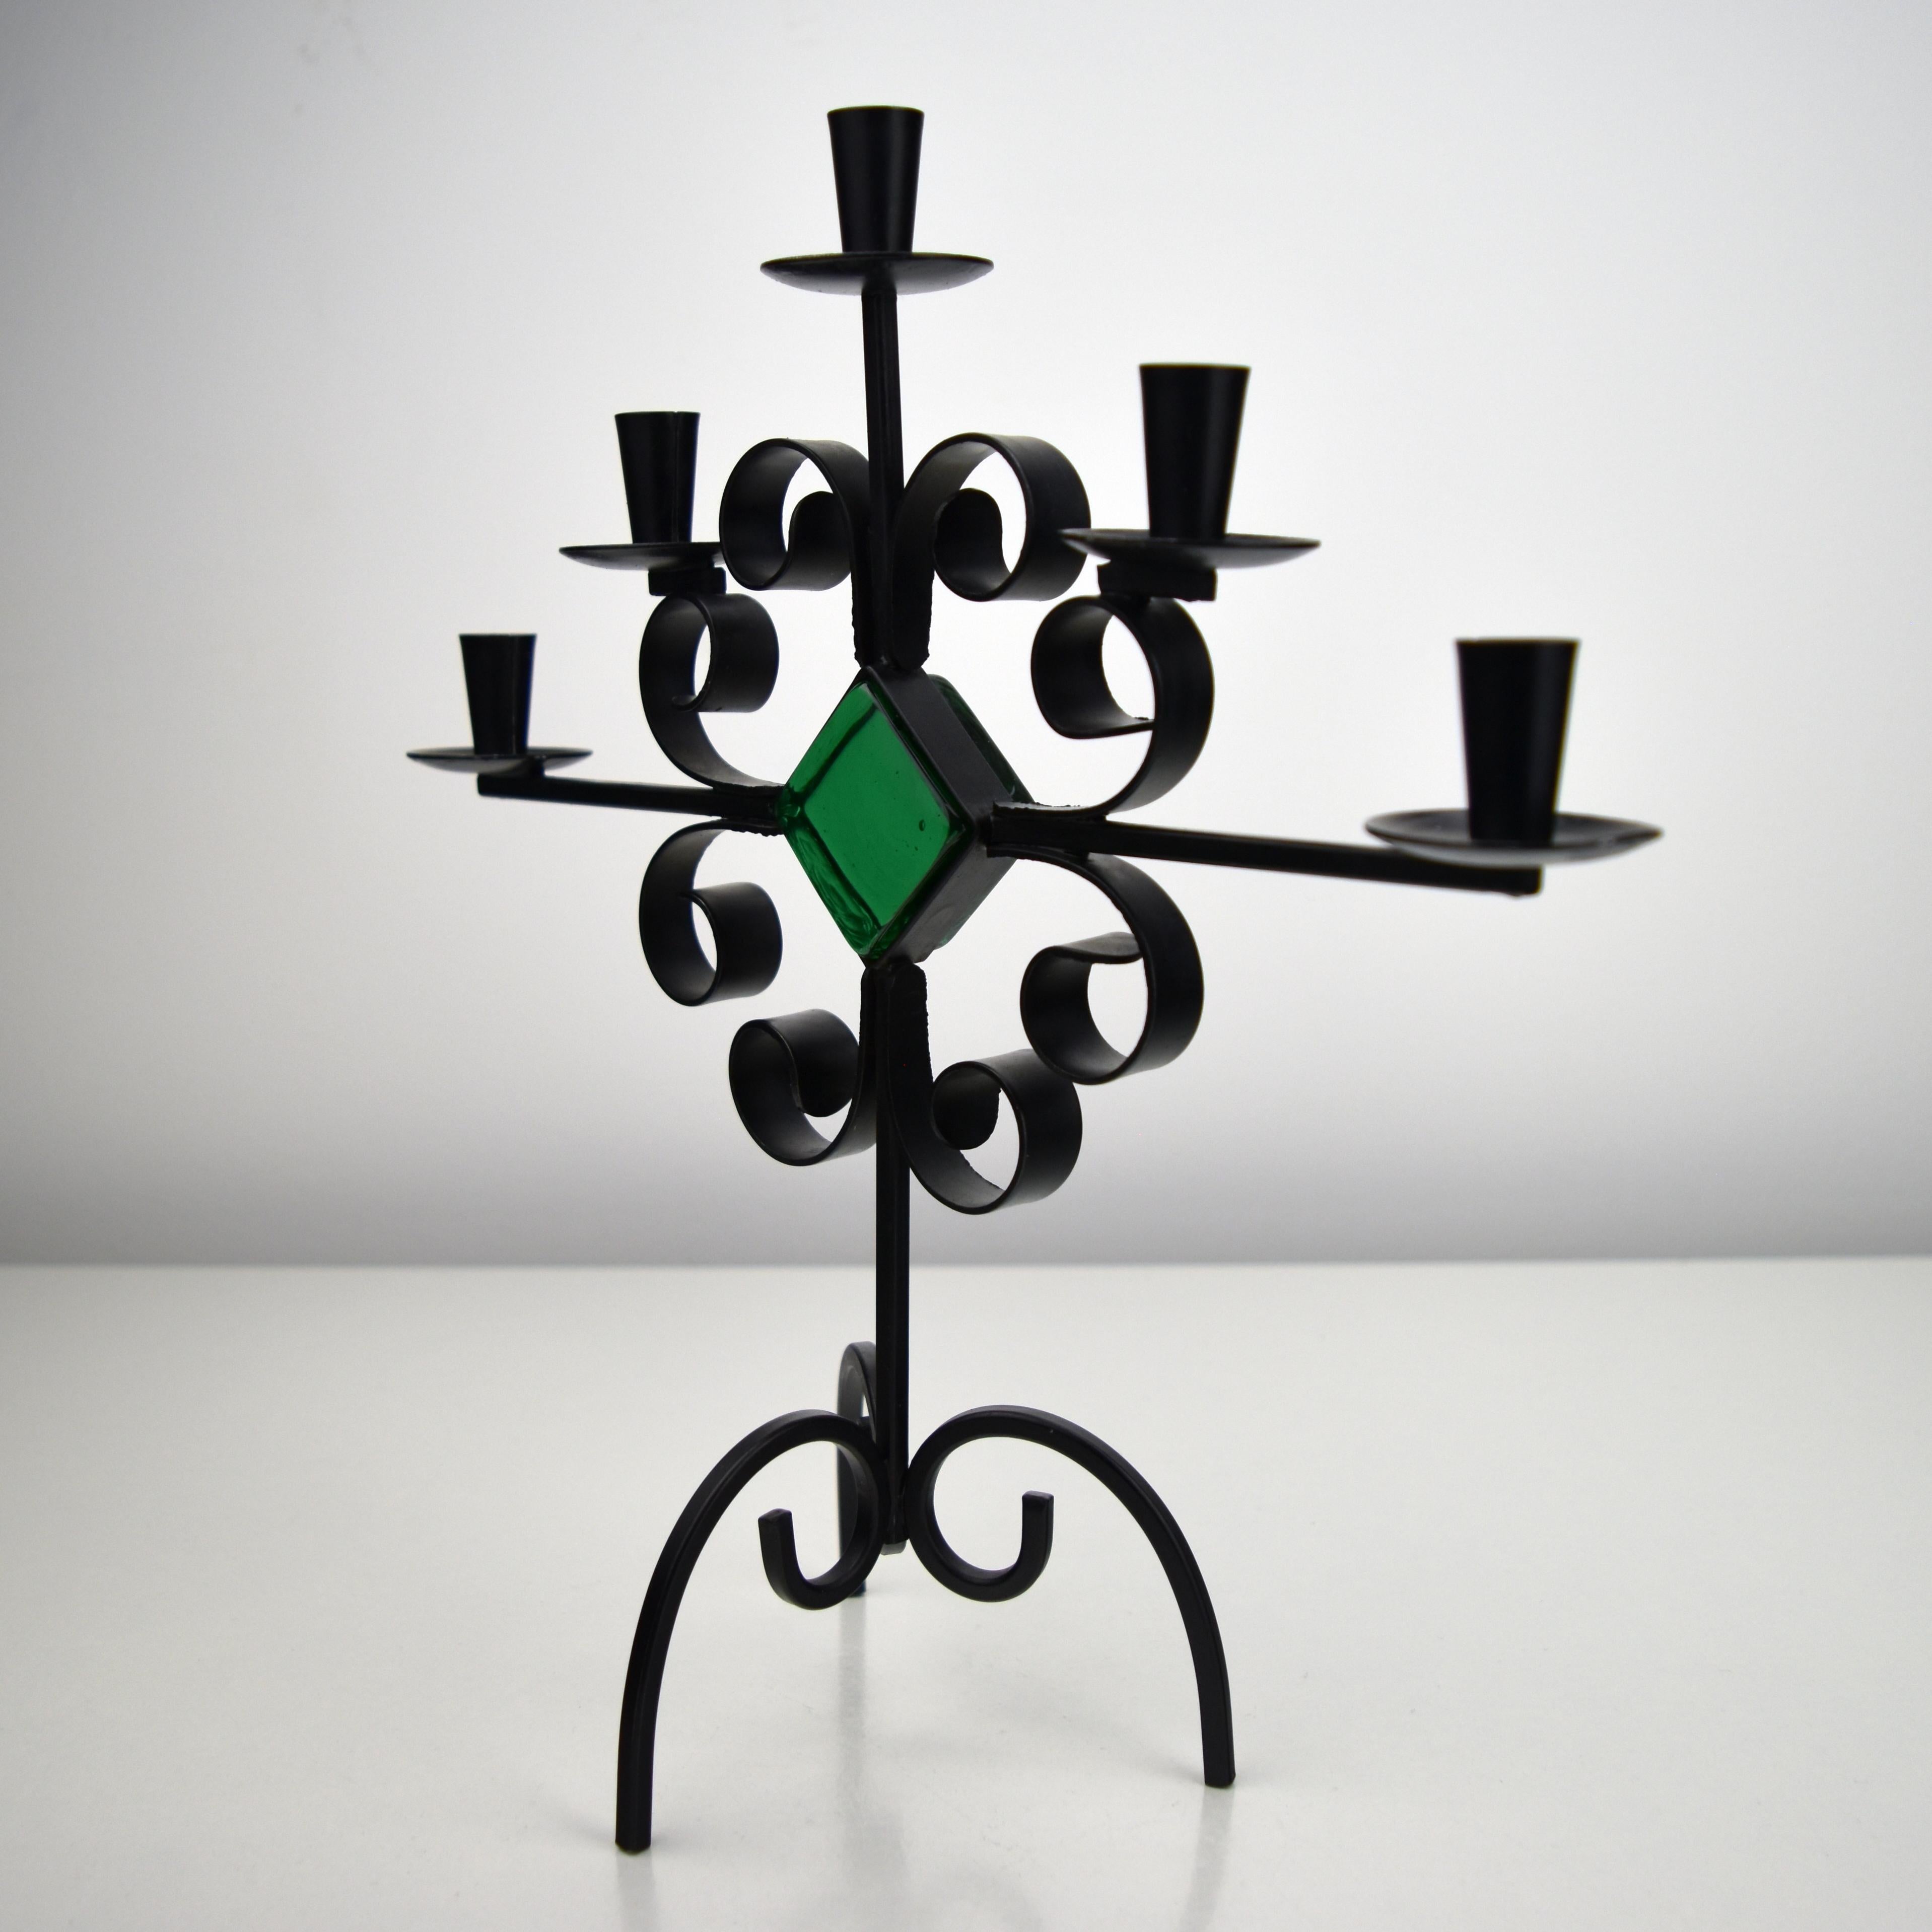 20th Century Wrought Iron Candelabra, Gunnar ANDER - 1960s for YSTAD For Sale